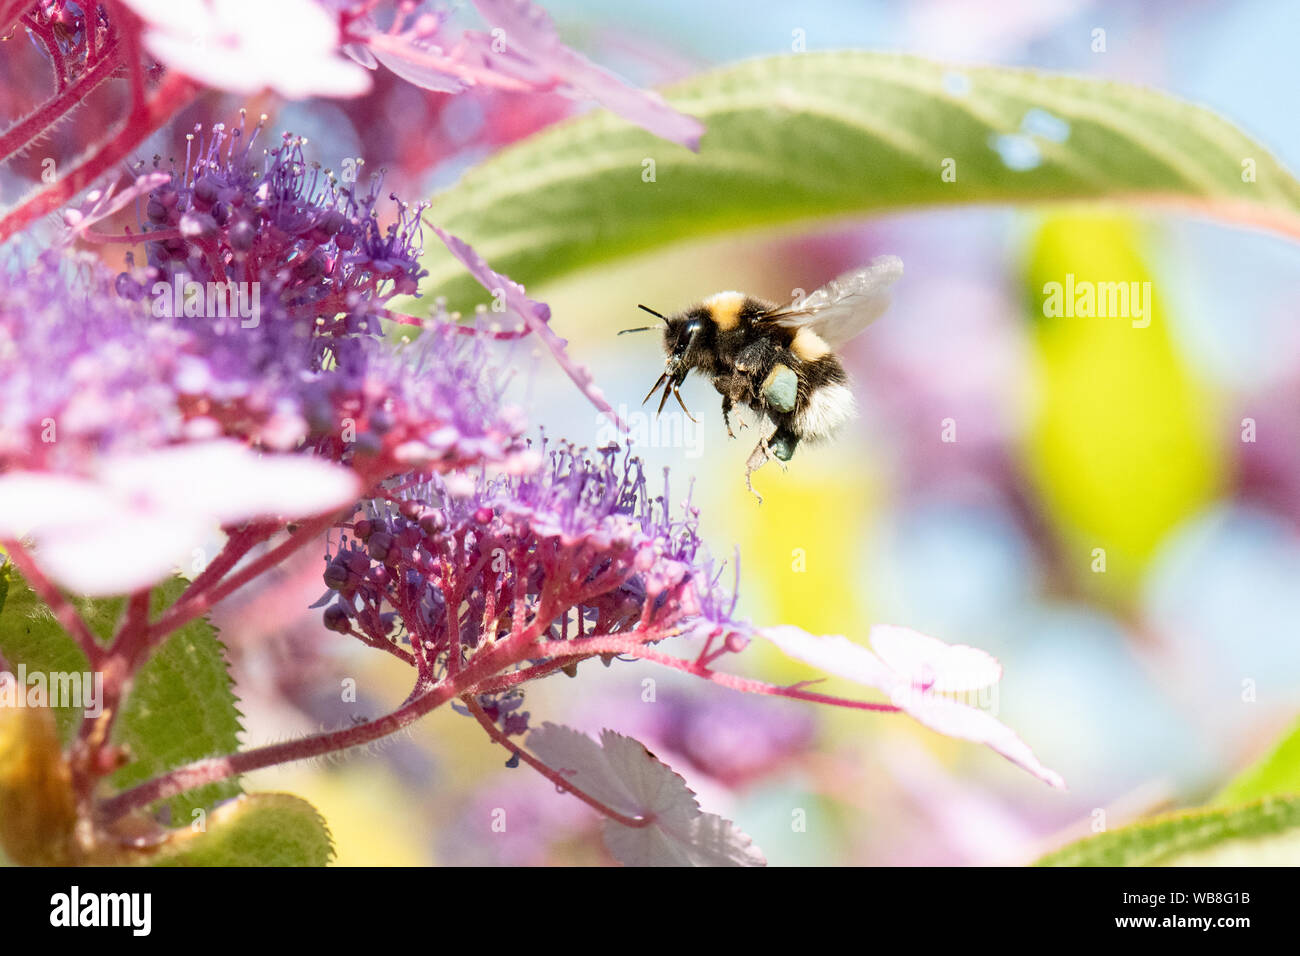 Killearn, Stirlingshire, Scotland, UK. 25th Aug, 2019. UK weather - a bumblebee with blue and yellow pollen baskets forages on hydrangea flowers under clear blue skies as temperatures rise in a Stirlingshire garden. Pollen colour varies depending on the species of plant from which bees collect pollen and can vary from white to dark blue. Credit: Kay Roxby/Alamy Live News Stock Photo